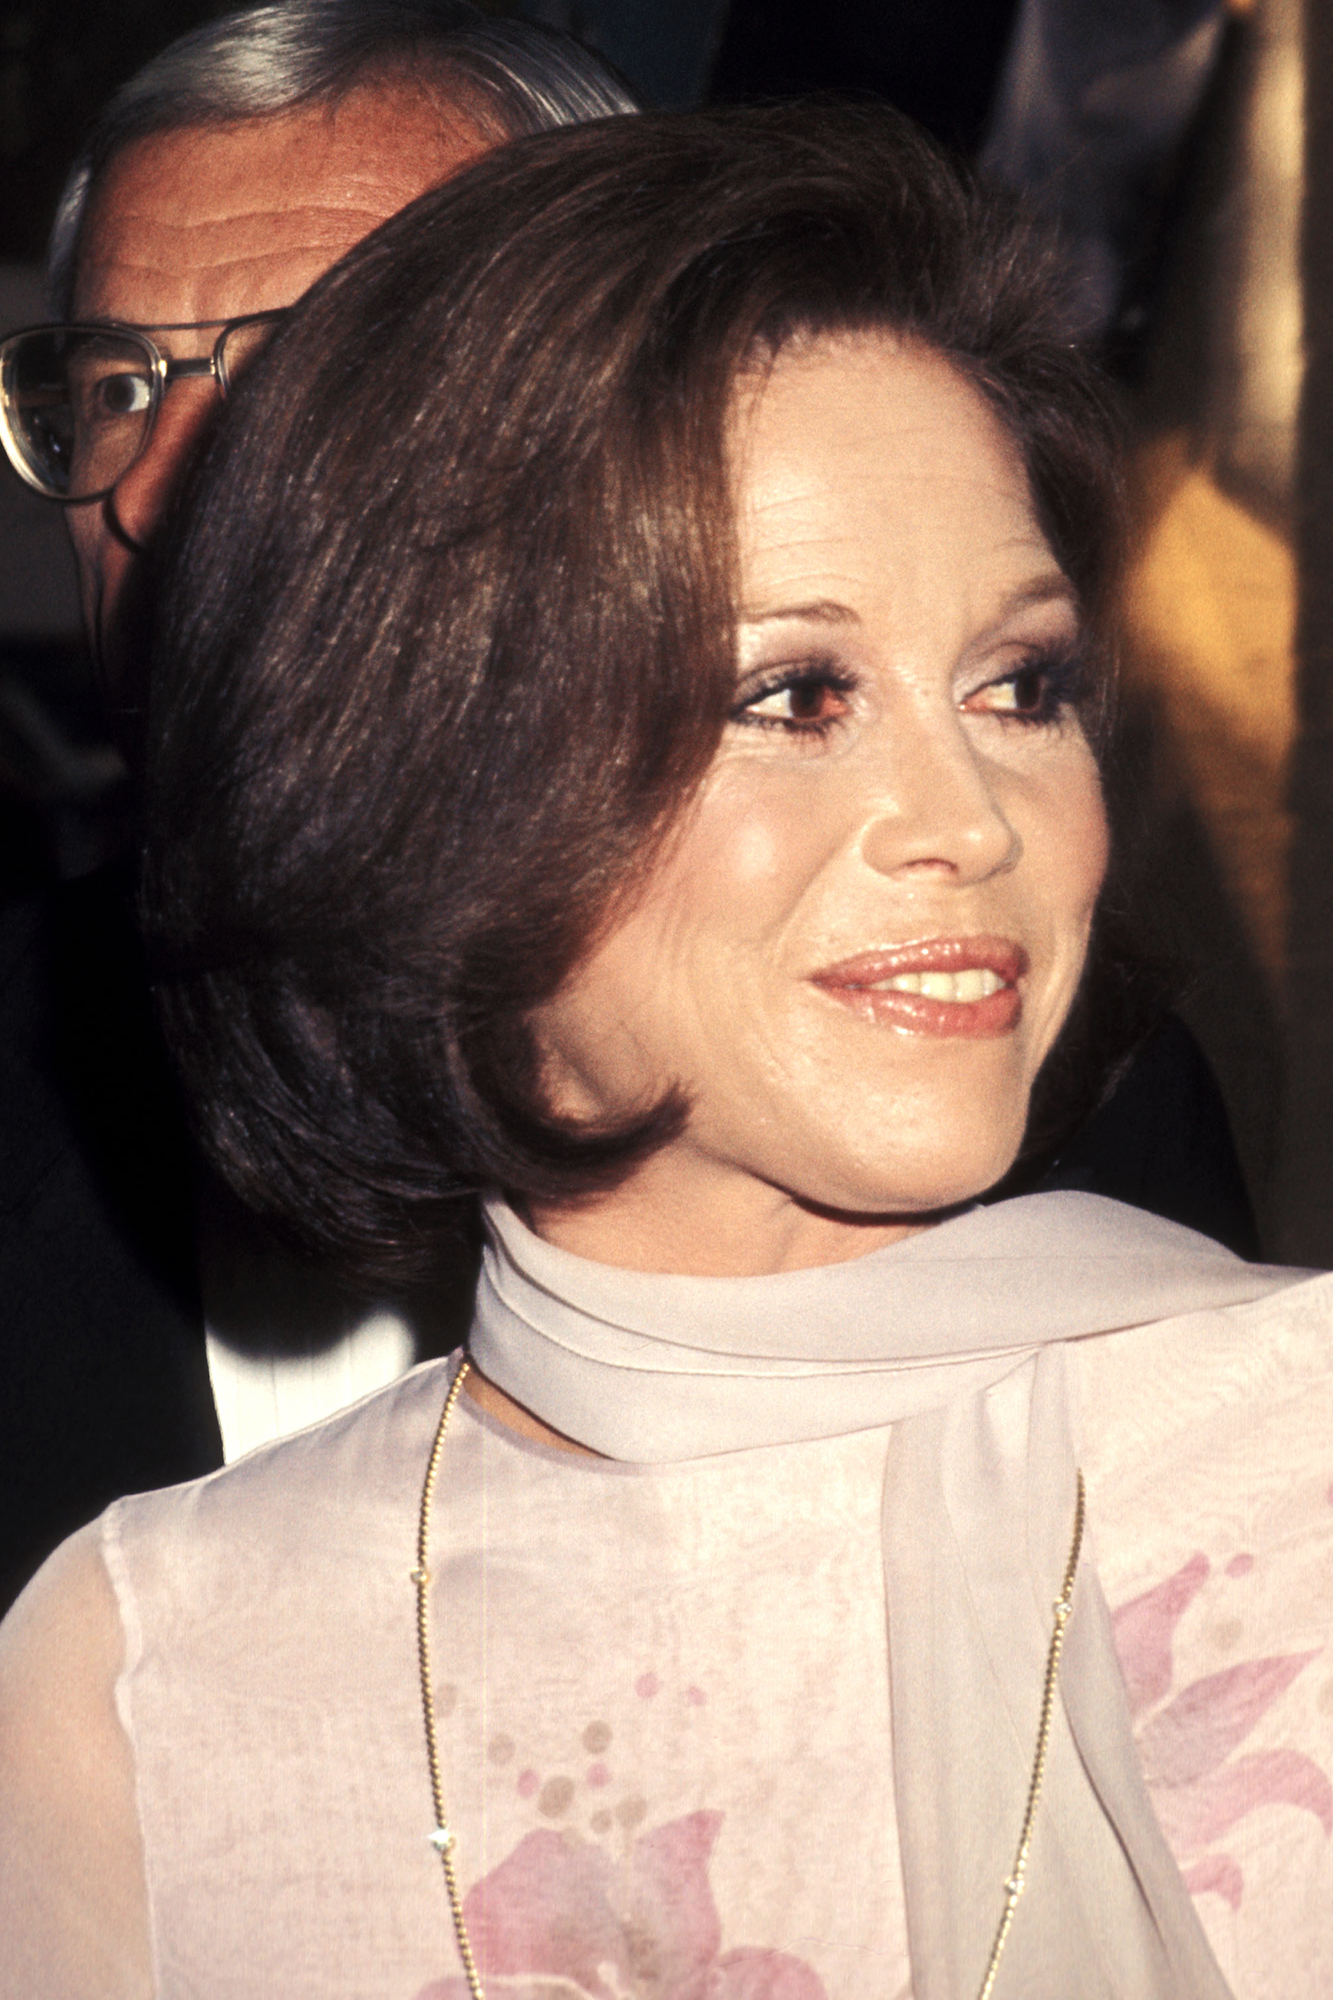 Mary Tyler Moore attends the Third Annual People's Choice Awards, on Feb. 10, 1977 in Hollywood, Calif.